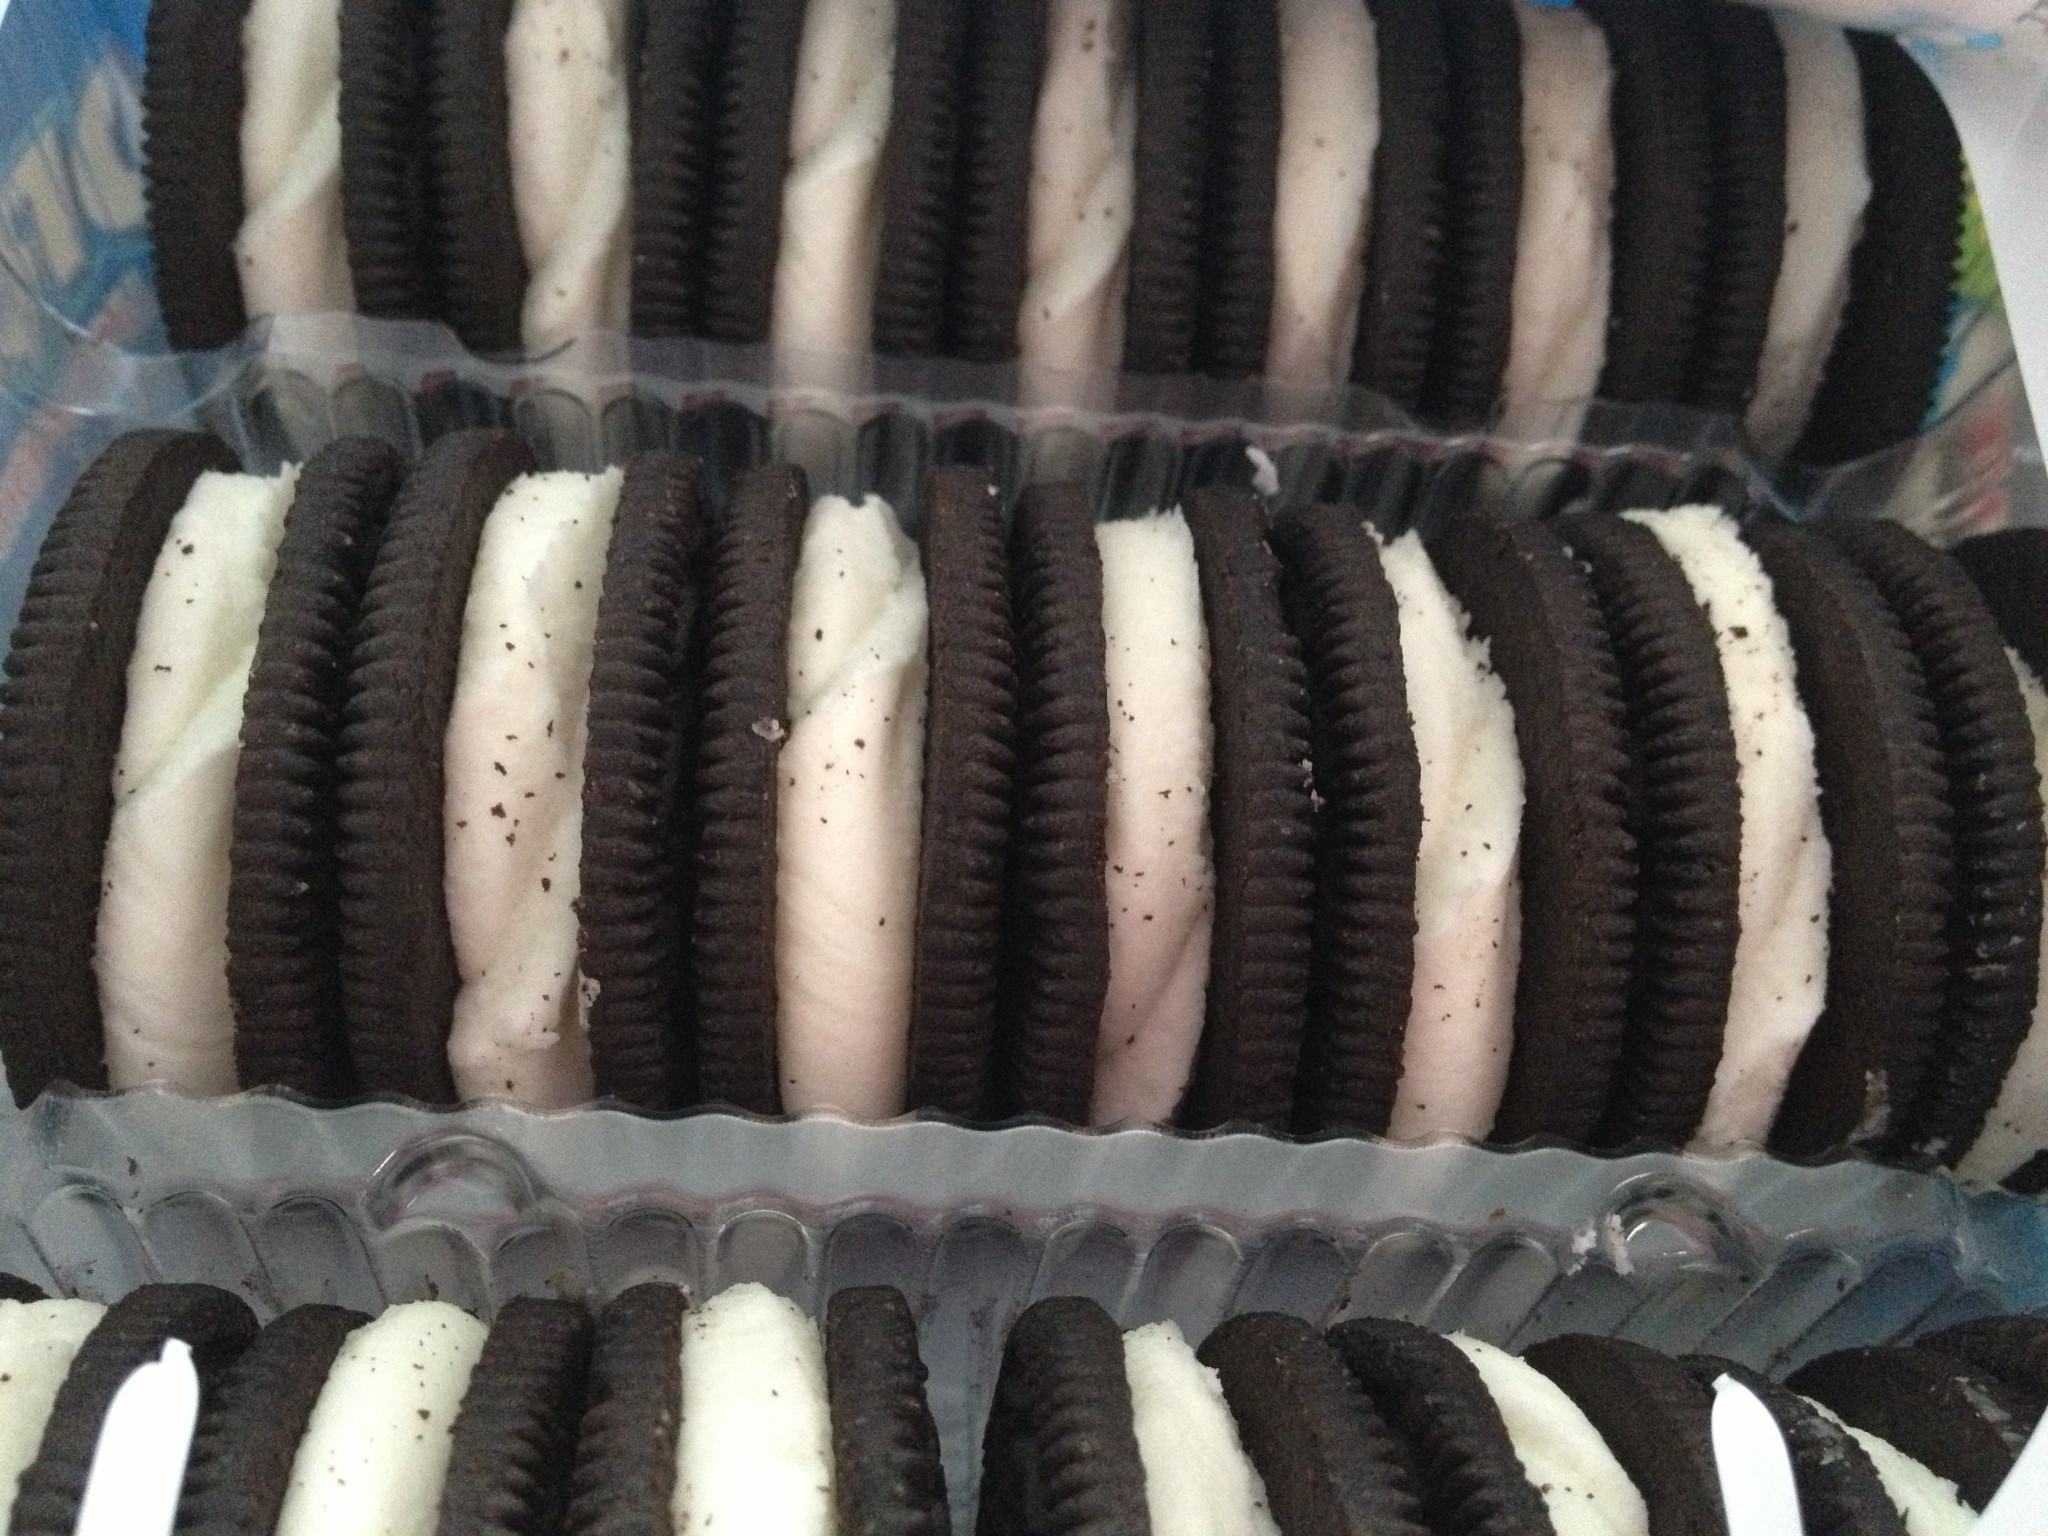 food blog, food review, oreo review, double stuf oreo, food blogger, fashion blog, fashion blogger, style blog, style blogger, mens fashion, mens fashion blog, mens style, mens style blog, womens style blog, anthropologie ootd blog, anthropologie ootd, anthropologie, ootd, mens ootd, womens ootd, 